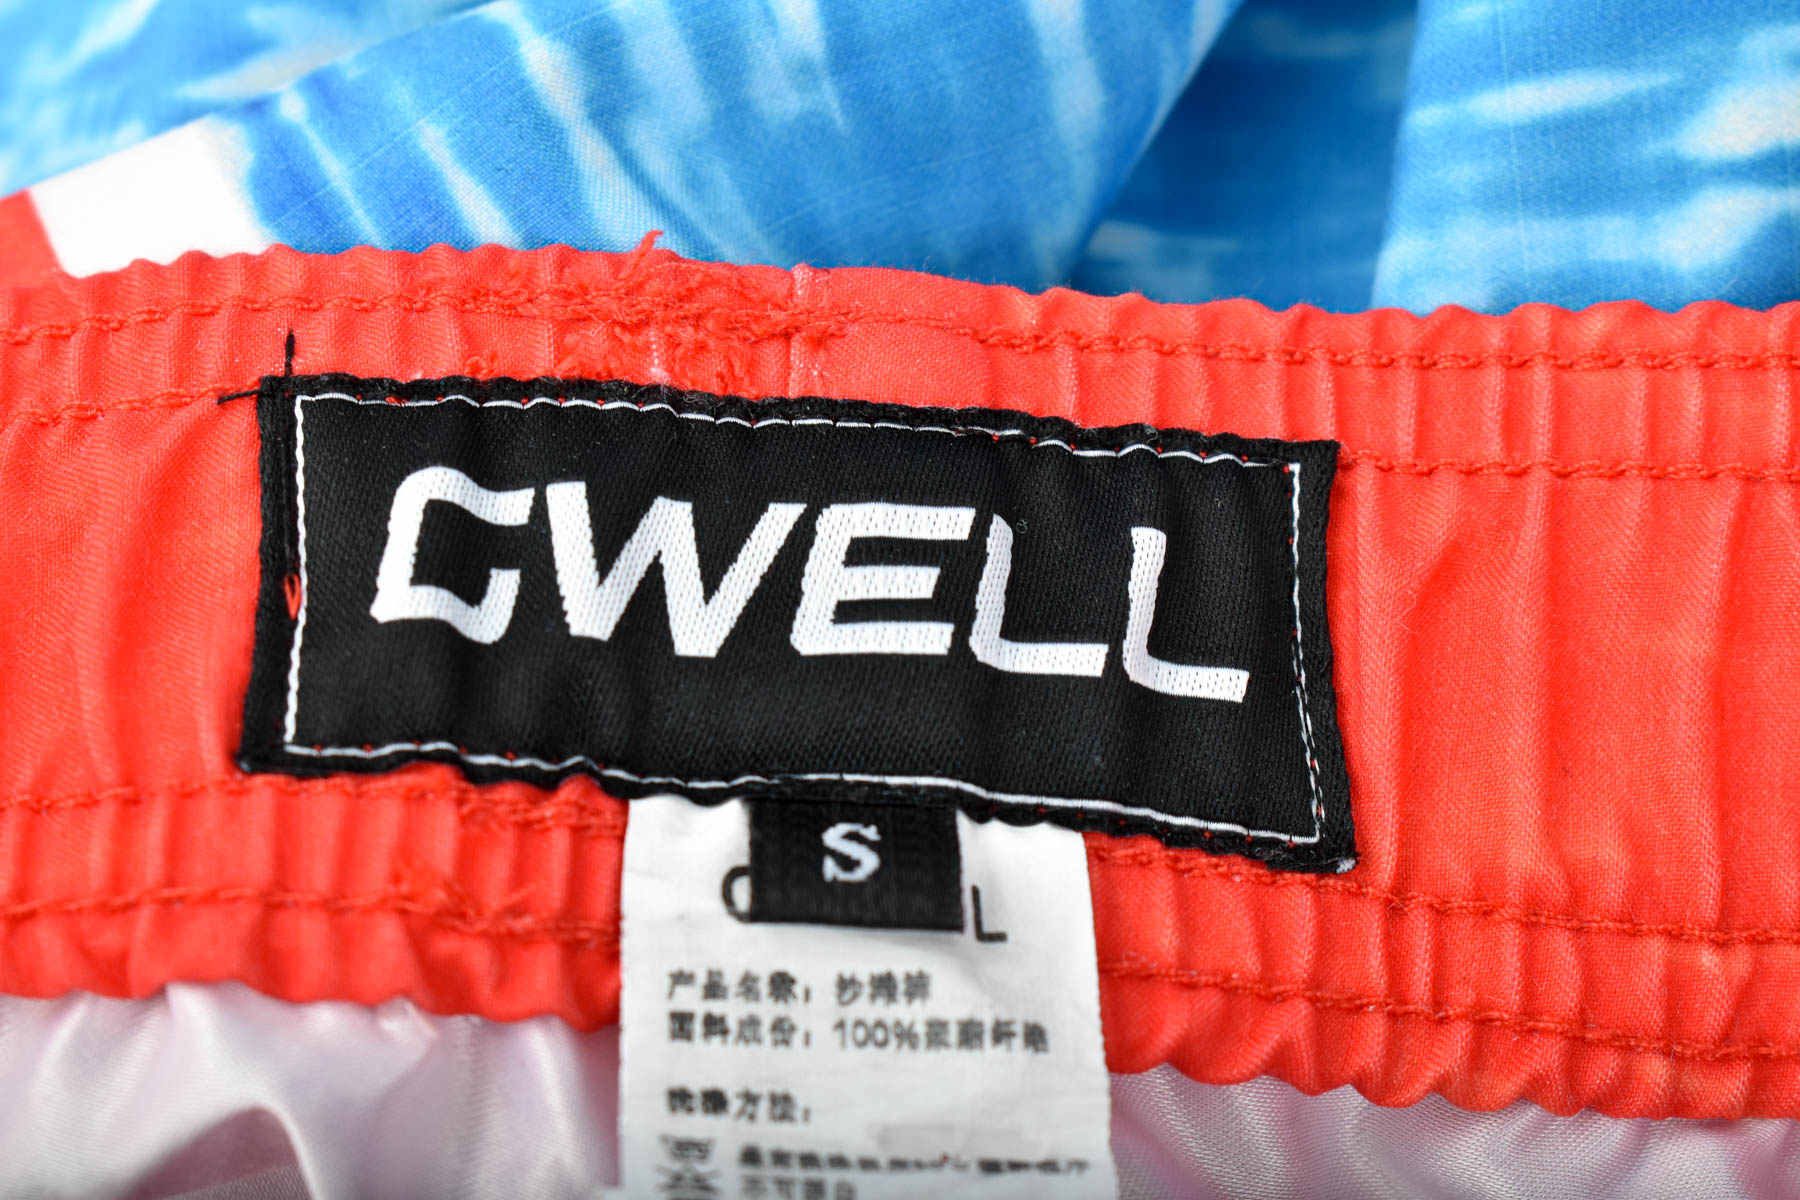 Men's shorts - GWELL - 2